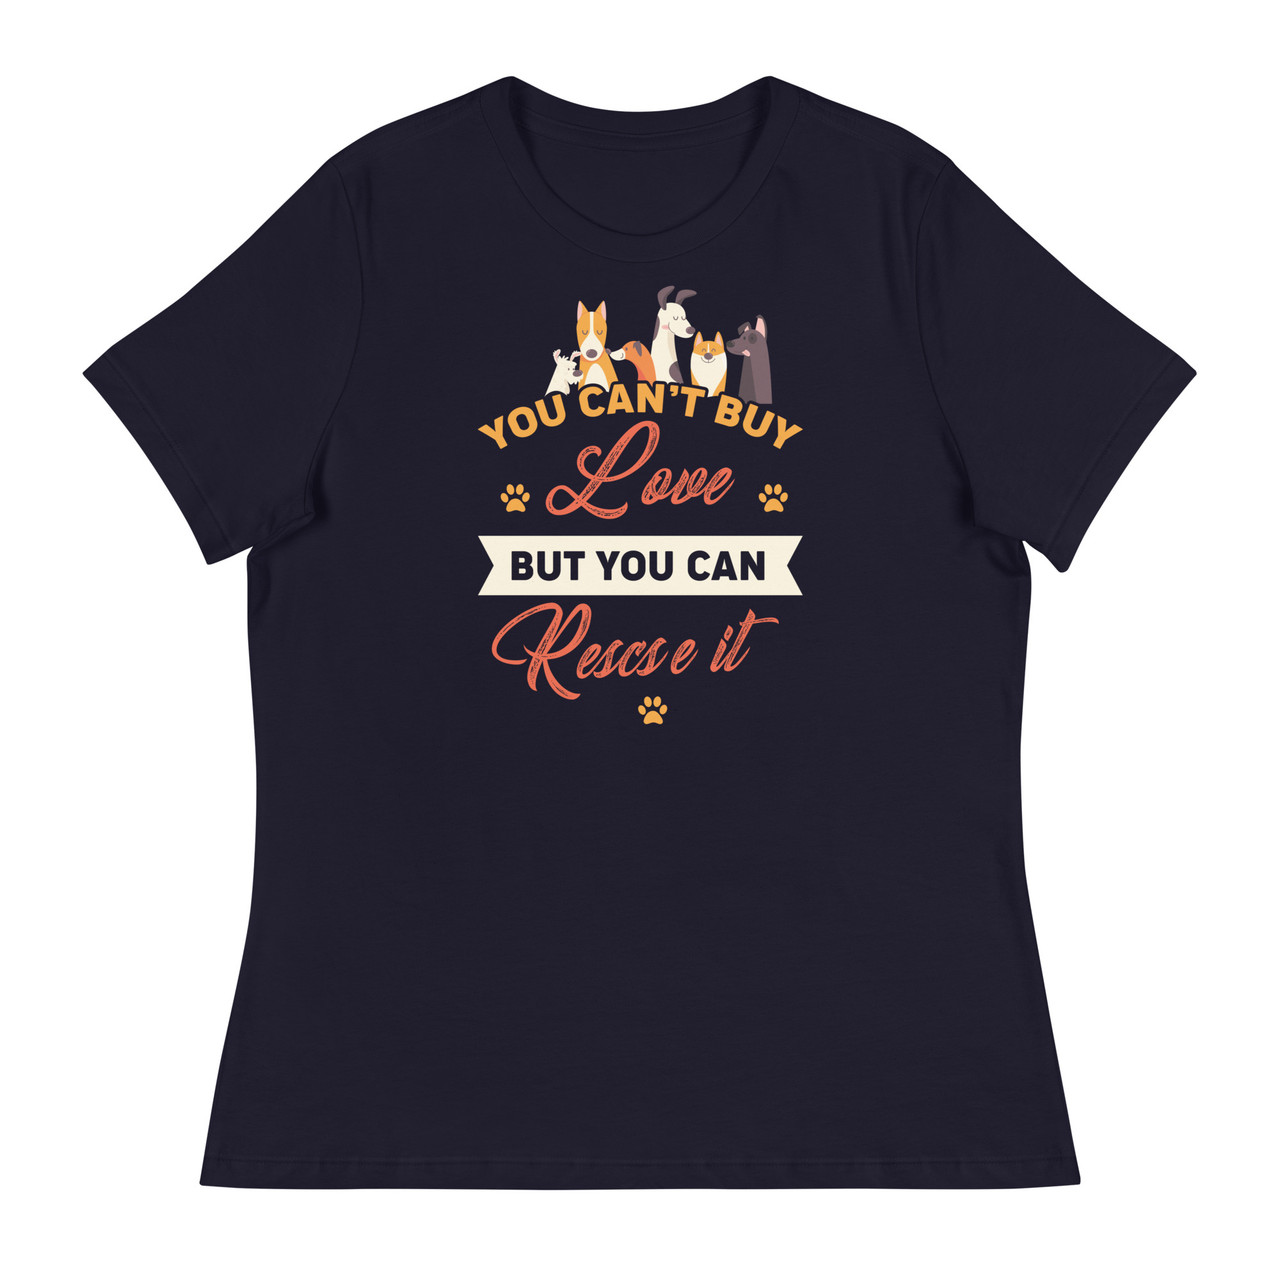 You Can't Buy Love But You Can Rescue It Women's Relaxed T-Shirt - Bella + Canvas 6400 